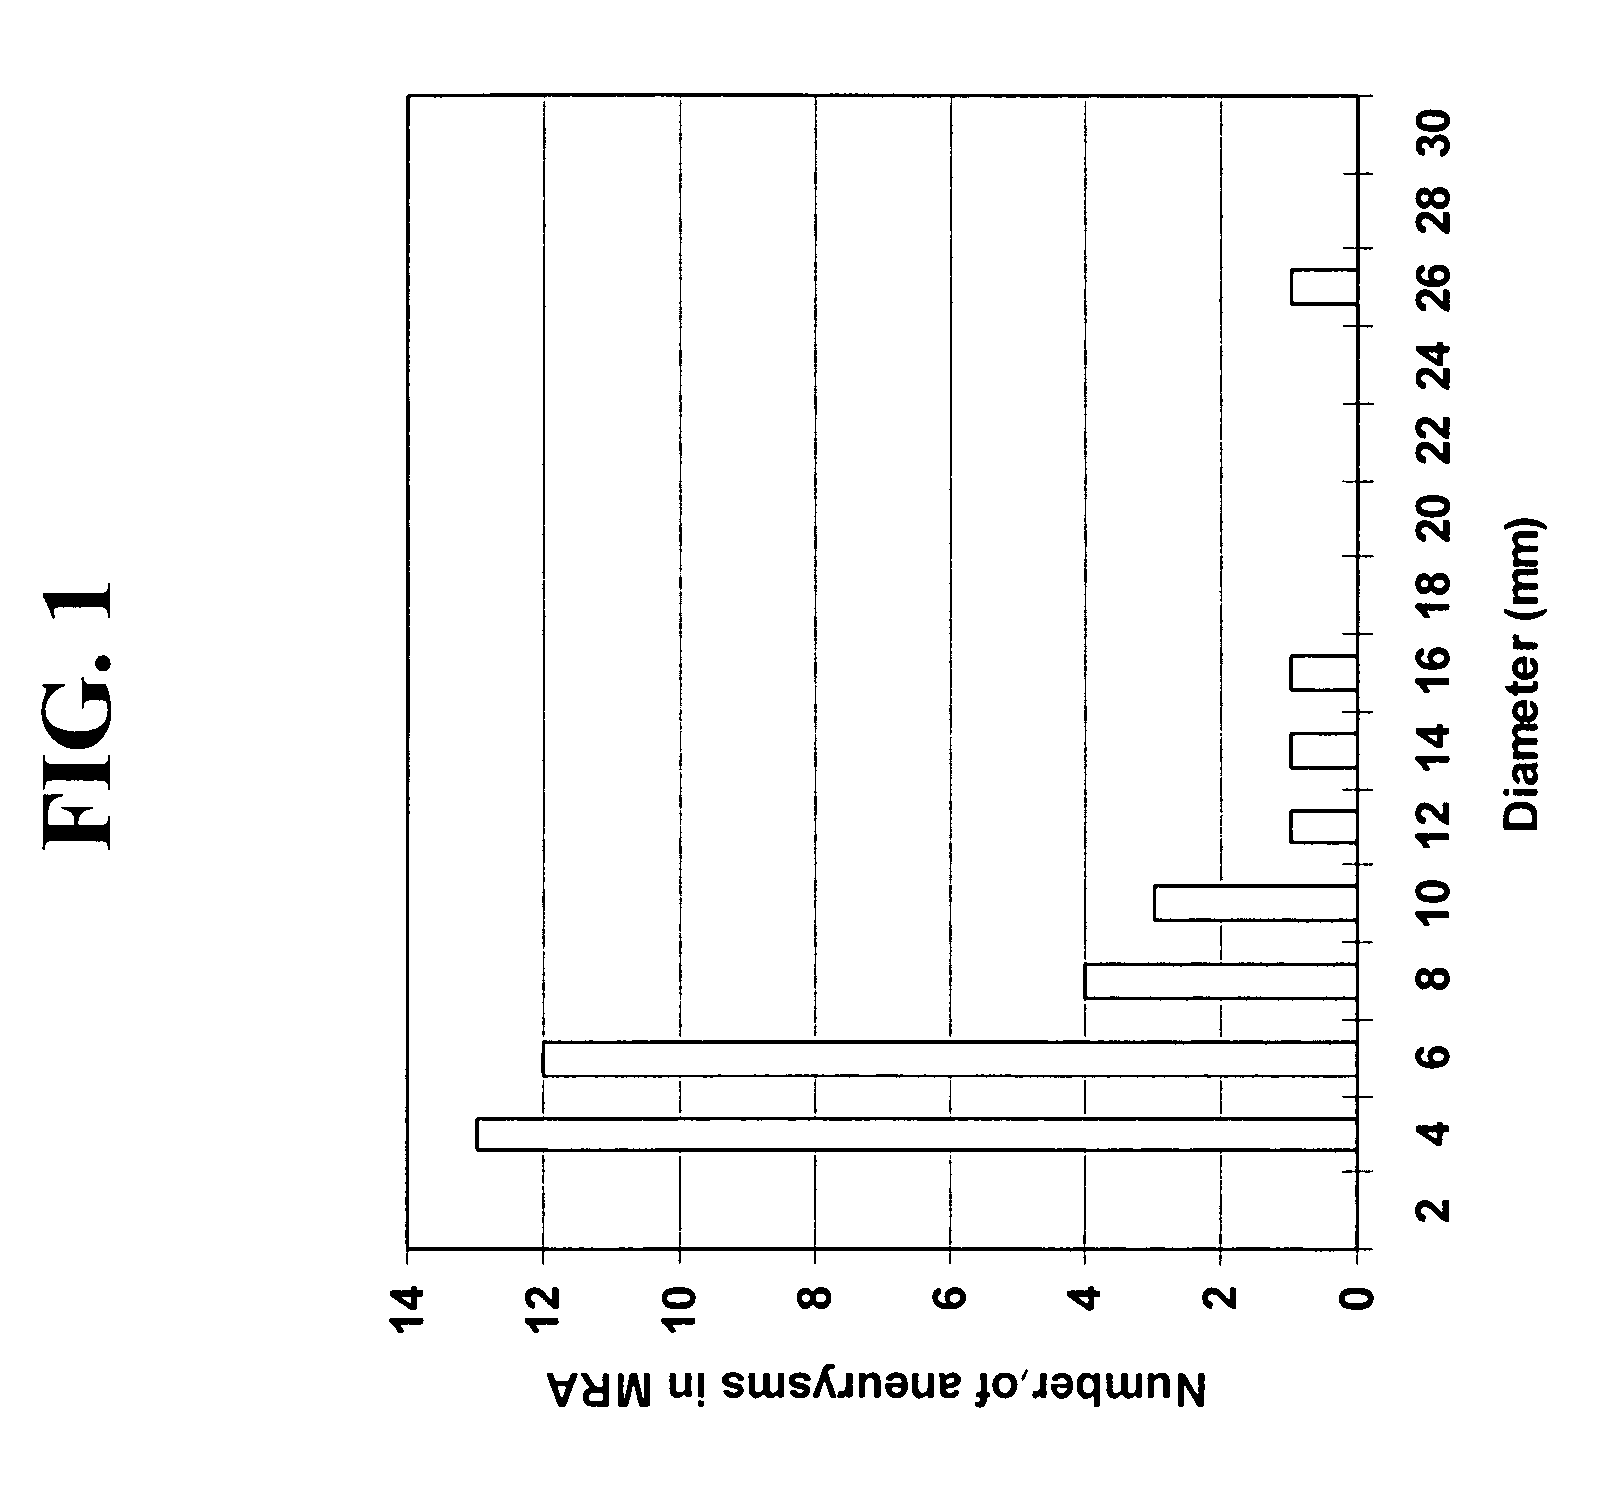 Method for detection of abnormalities in three-dimensional imaging data